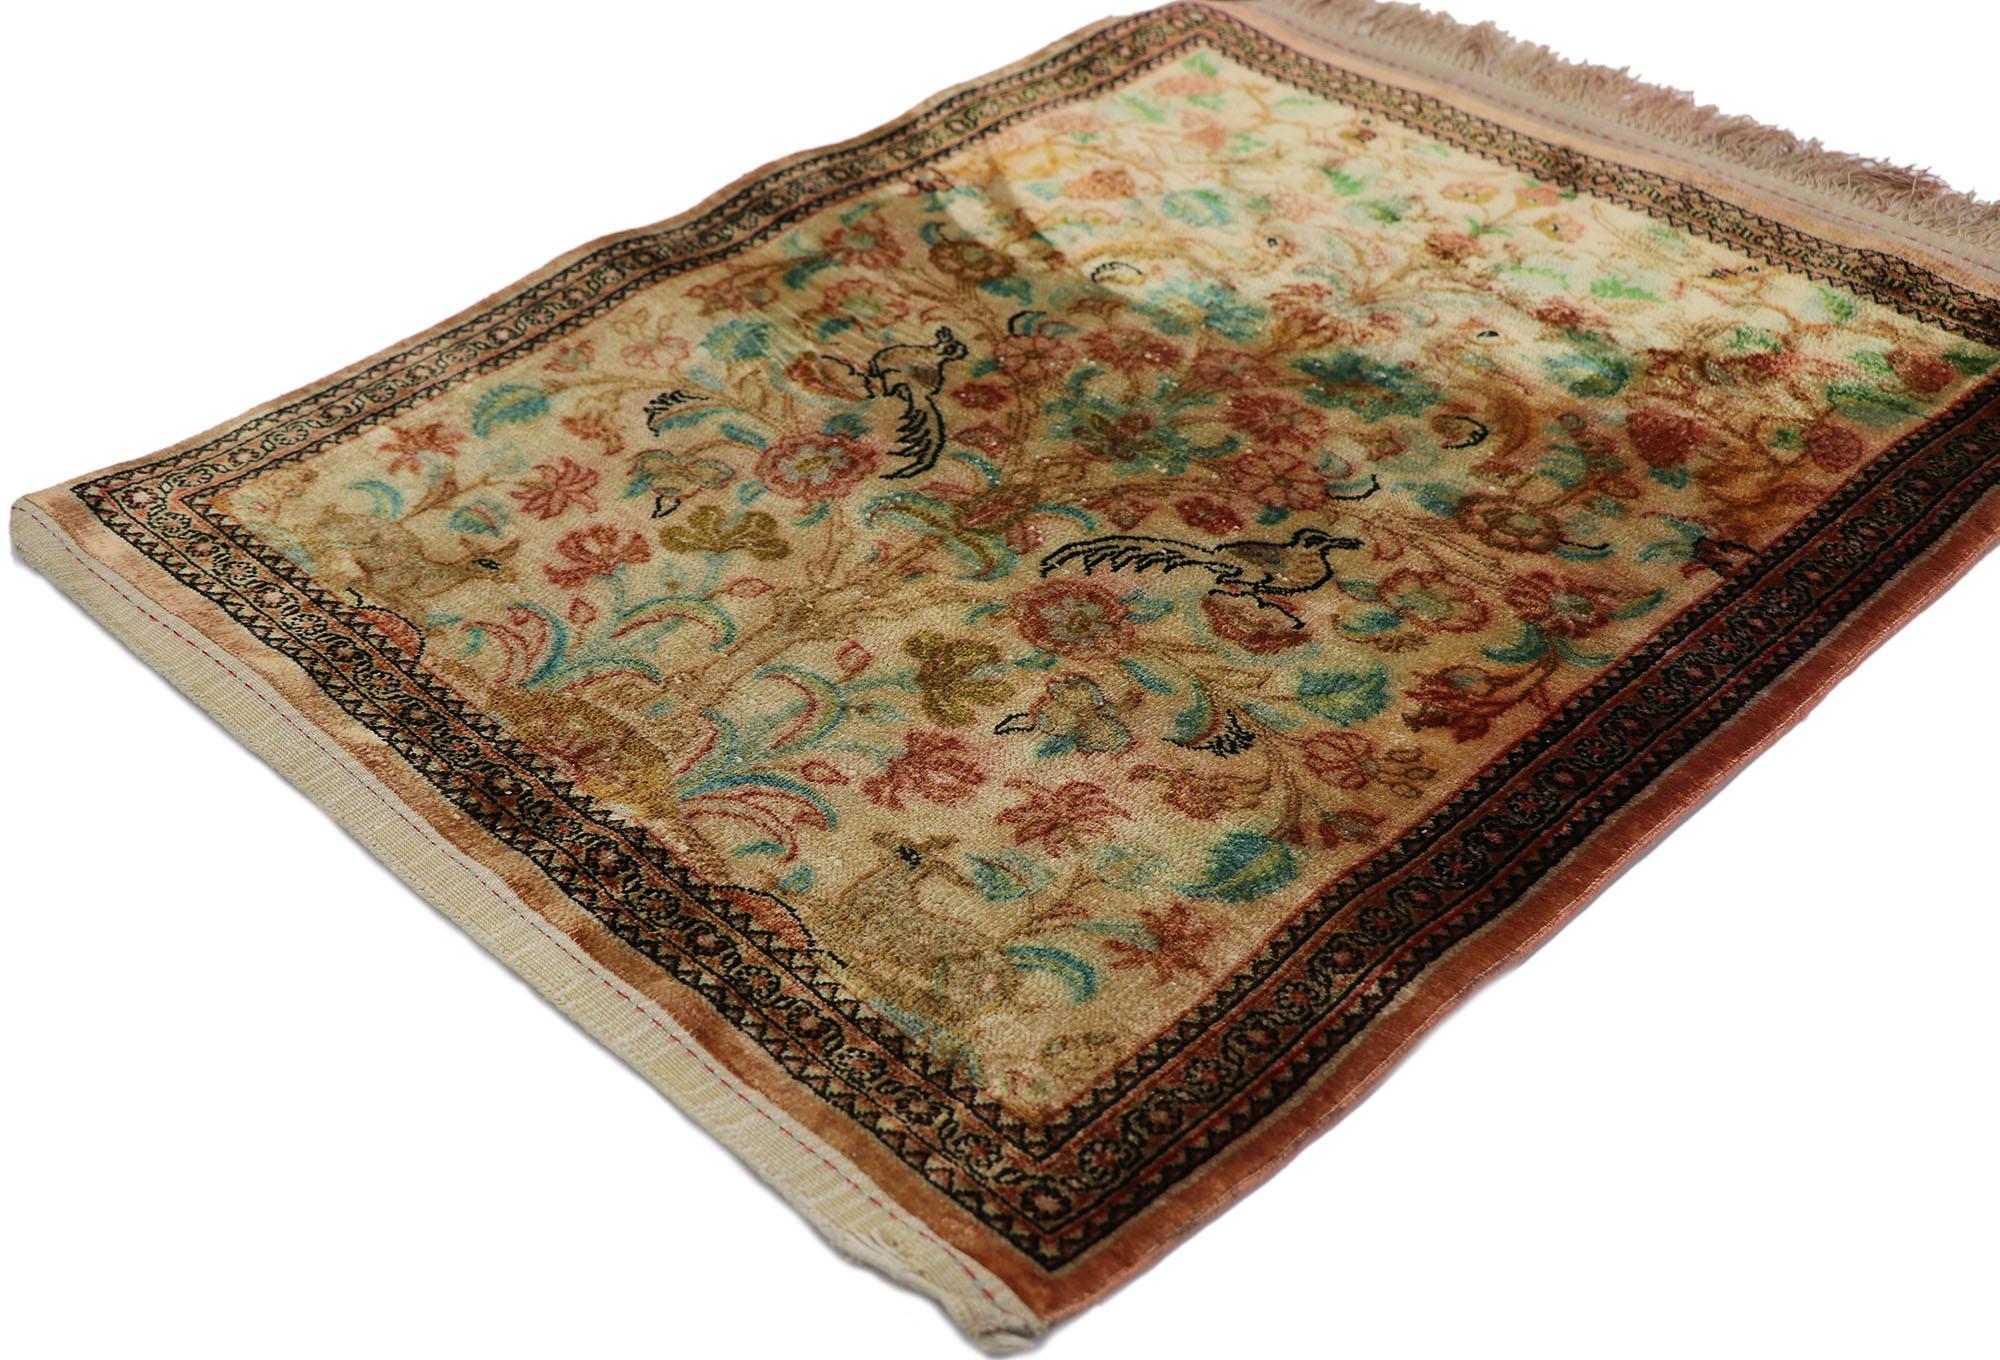 21677 Vintage Persian Silk Qum Rug, 01'11 x 02'06. Emanating timeless style with incredible detail and texture, this vintage Persian silk Qum rug is a captivating vision of woven beauty. The tree of life design and time-softened colors woven into